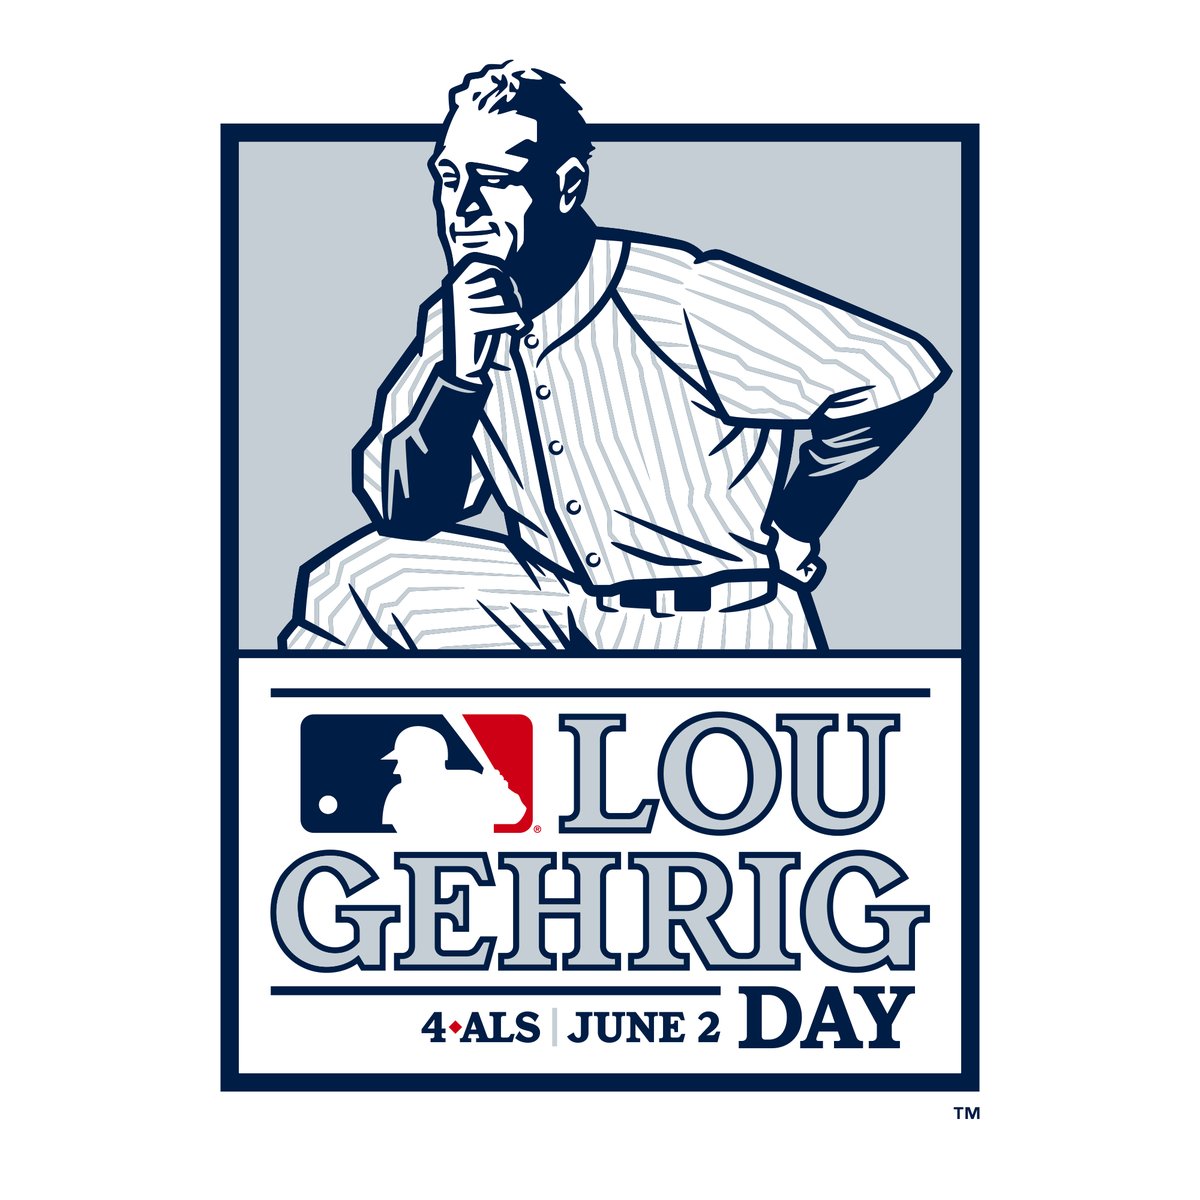 Today, we honor Lou Gehrig Day at #DellDiamond by increasing awareness of ALS, also known as Lou Gehrig's Disease, during the game.